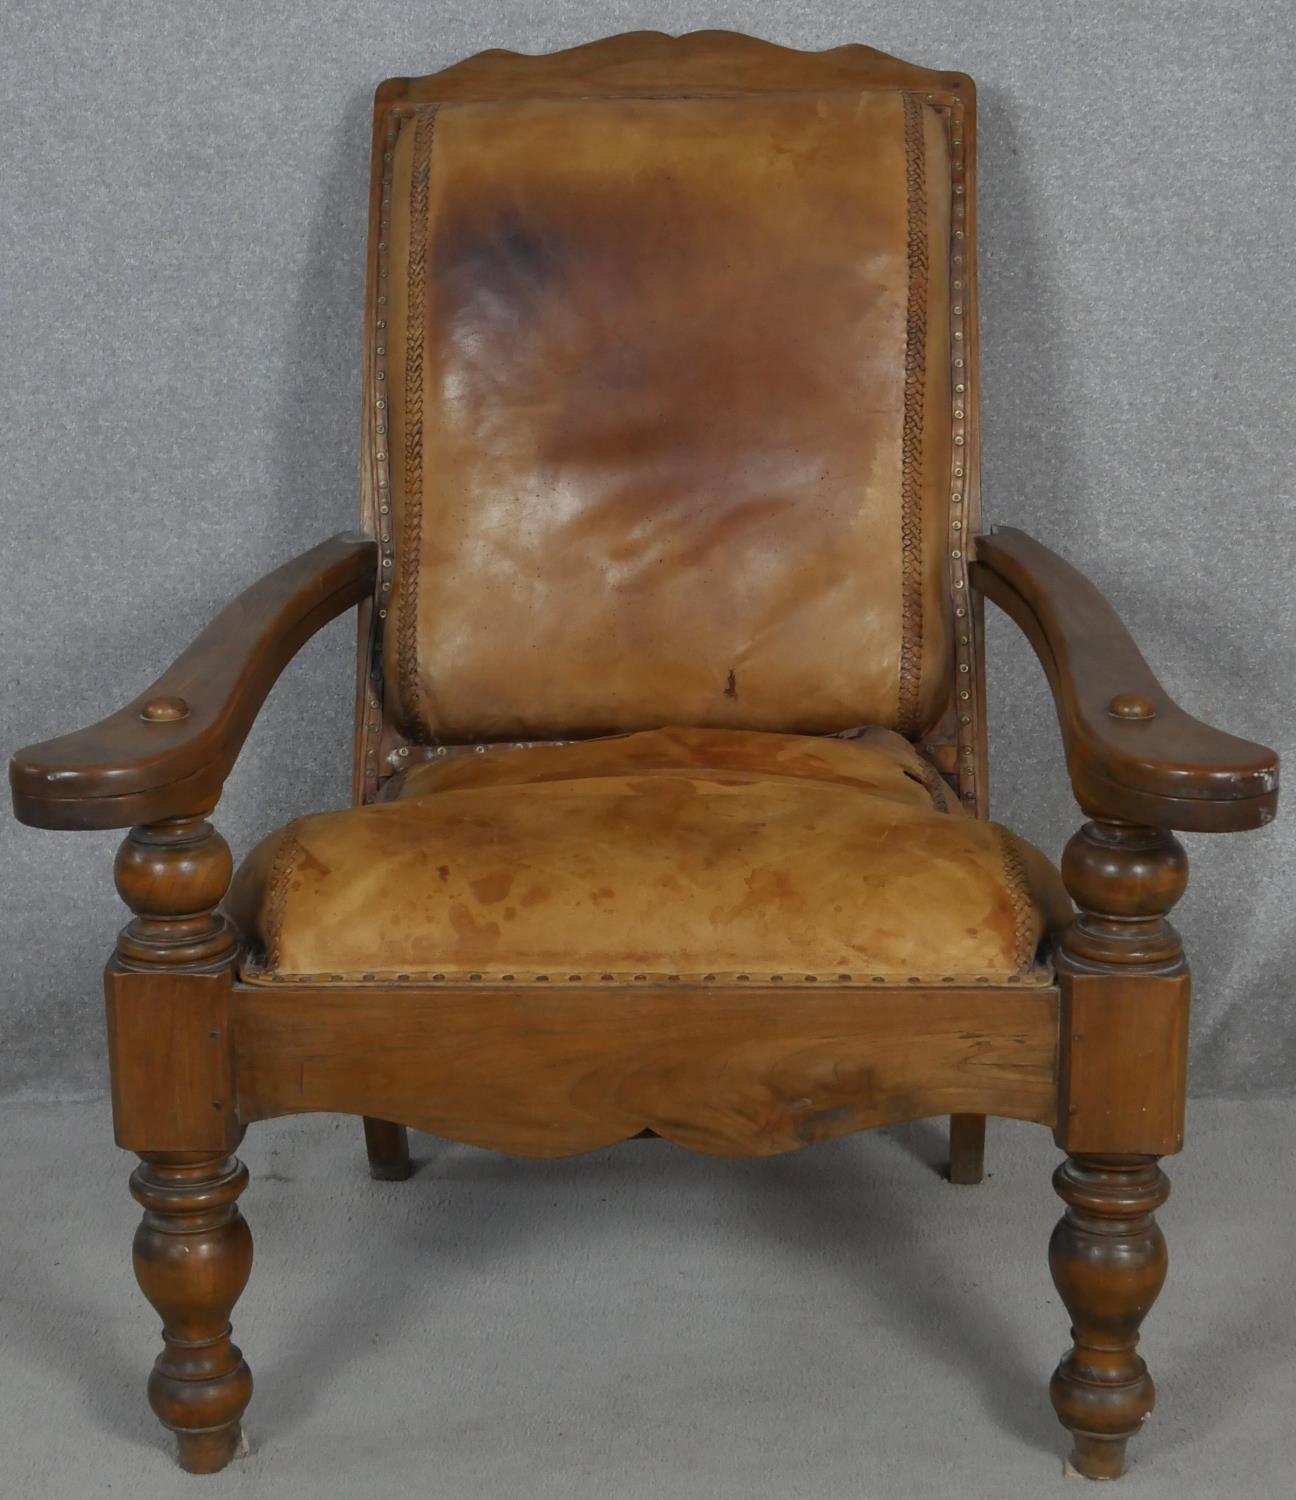 A 19th century teak planter's style armchair with folding leg rests in leather upholstery on